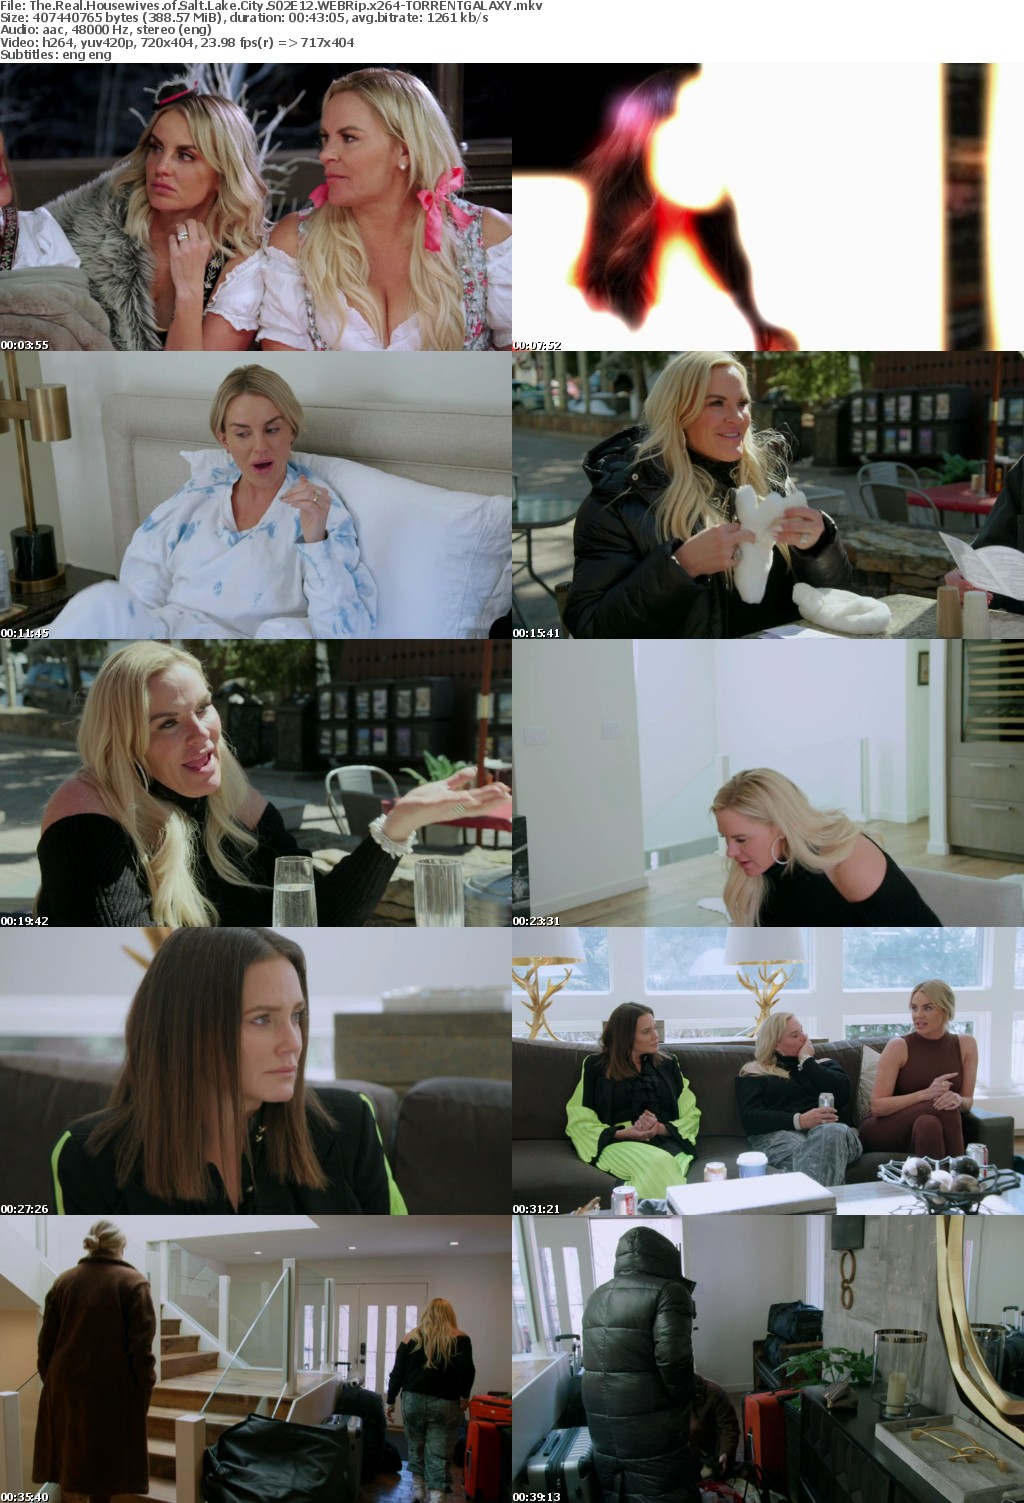 The Real Housewives of Salt Lake City S02E12 WEBRip x264-GALAXY